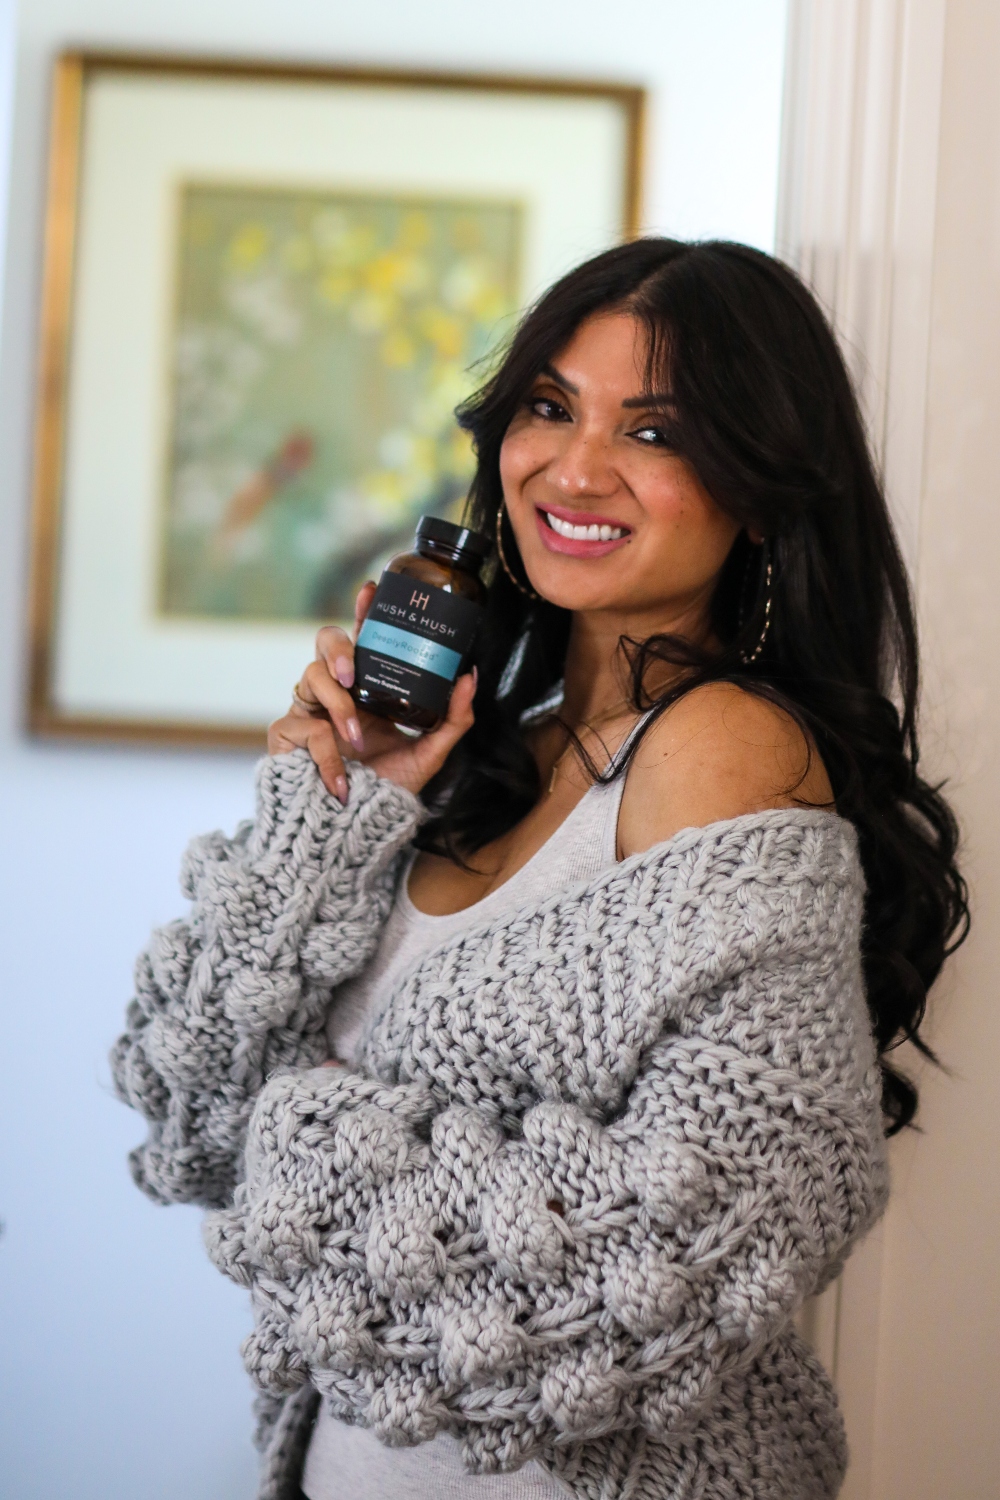 Want to know the secret to healthy hair? Orange County Blogger Debbie Savage is sharing her lastest secret to healthy hair - Hush Hush Supplements. See why you need them HERE!